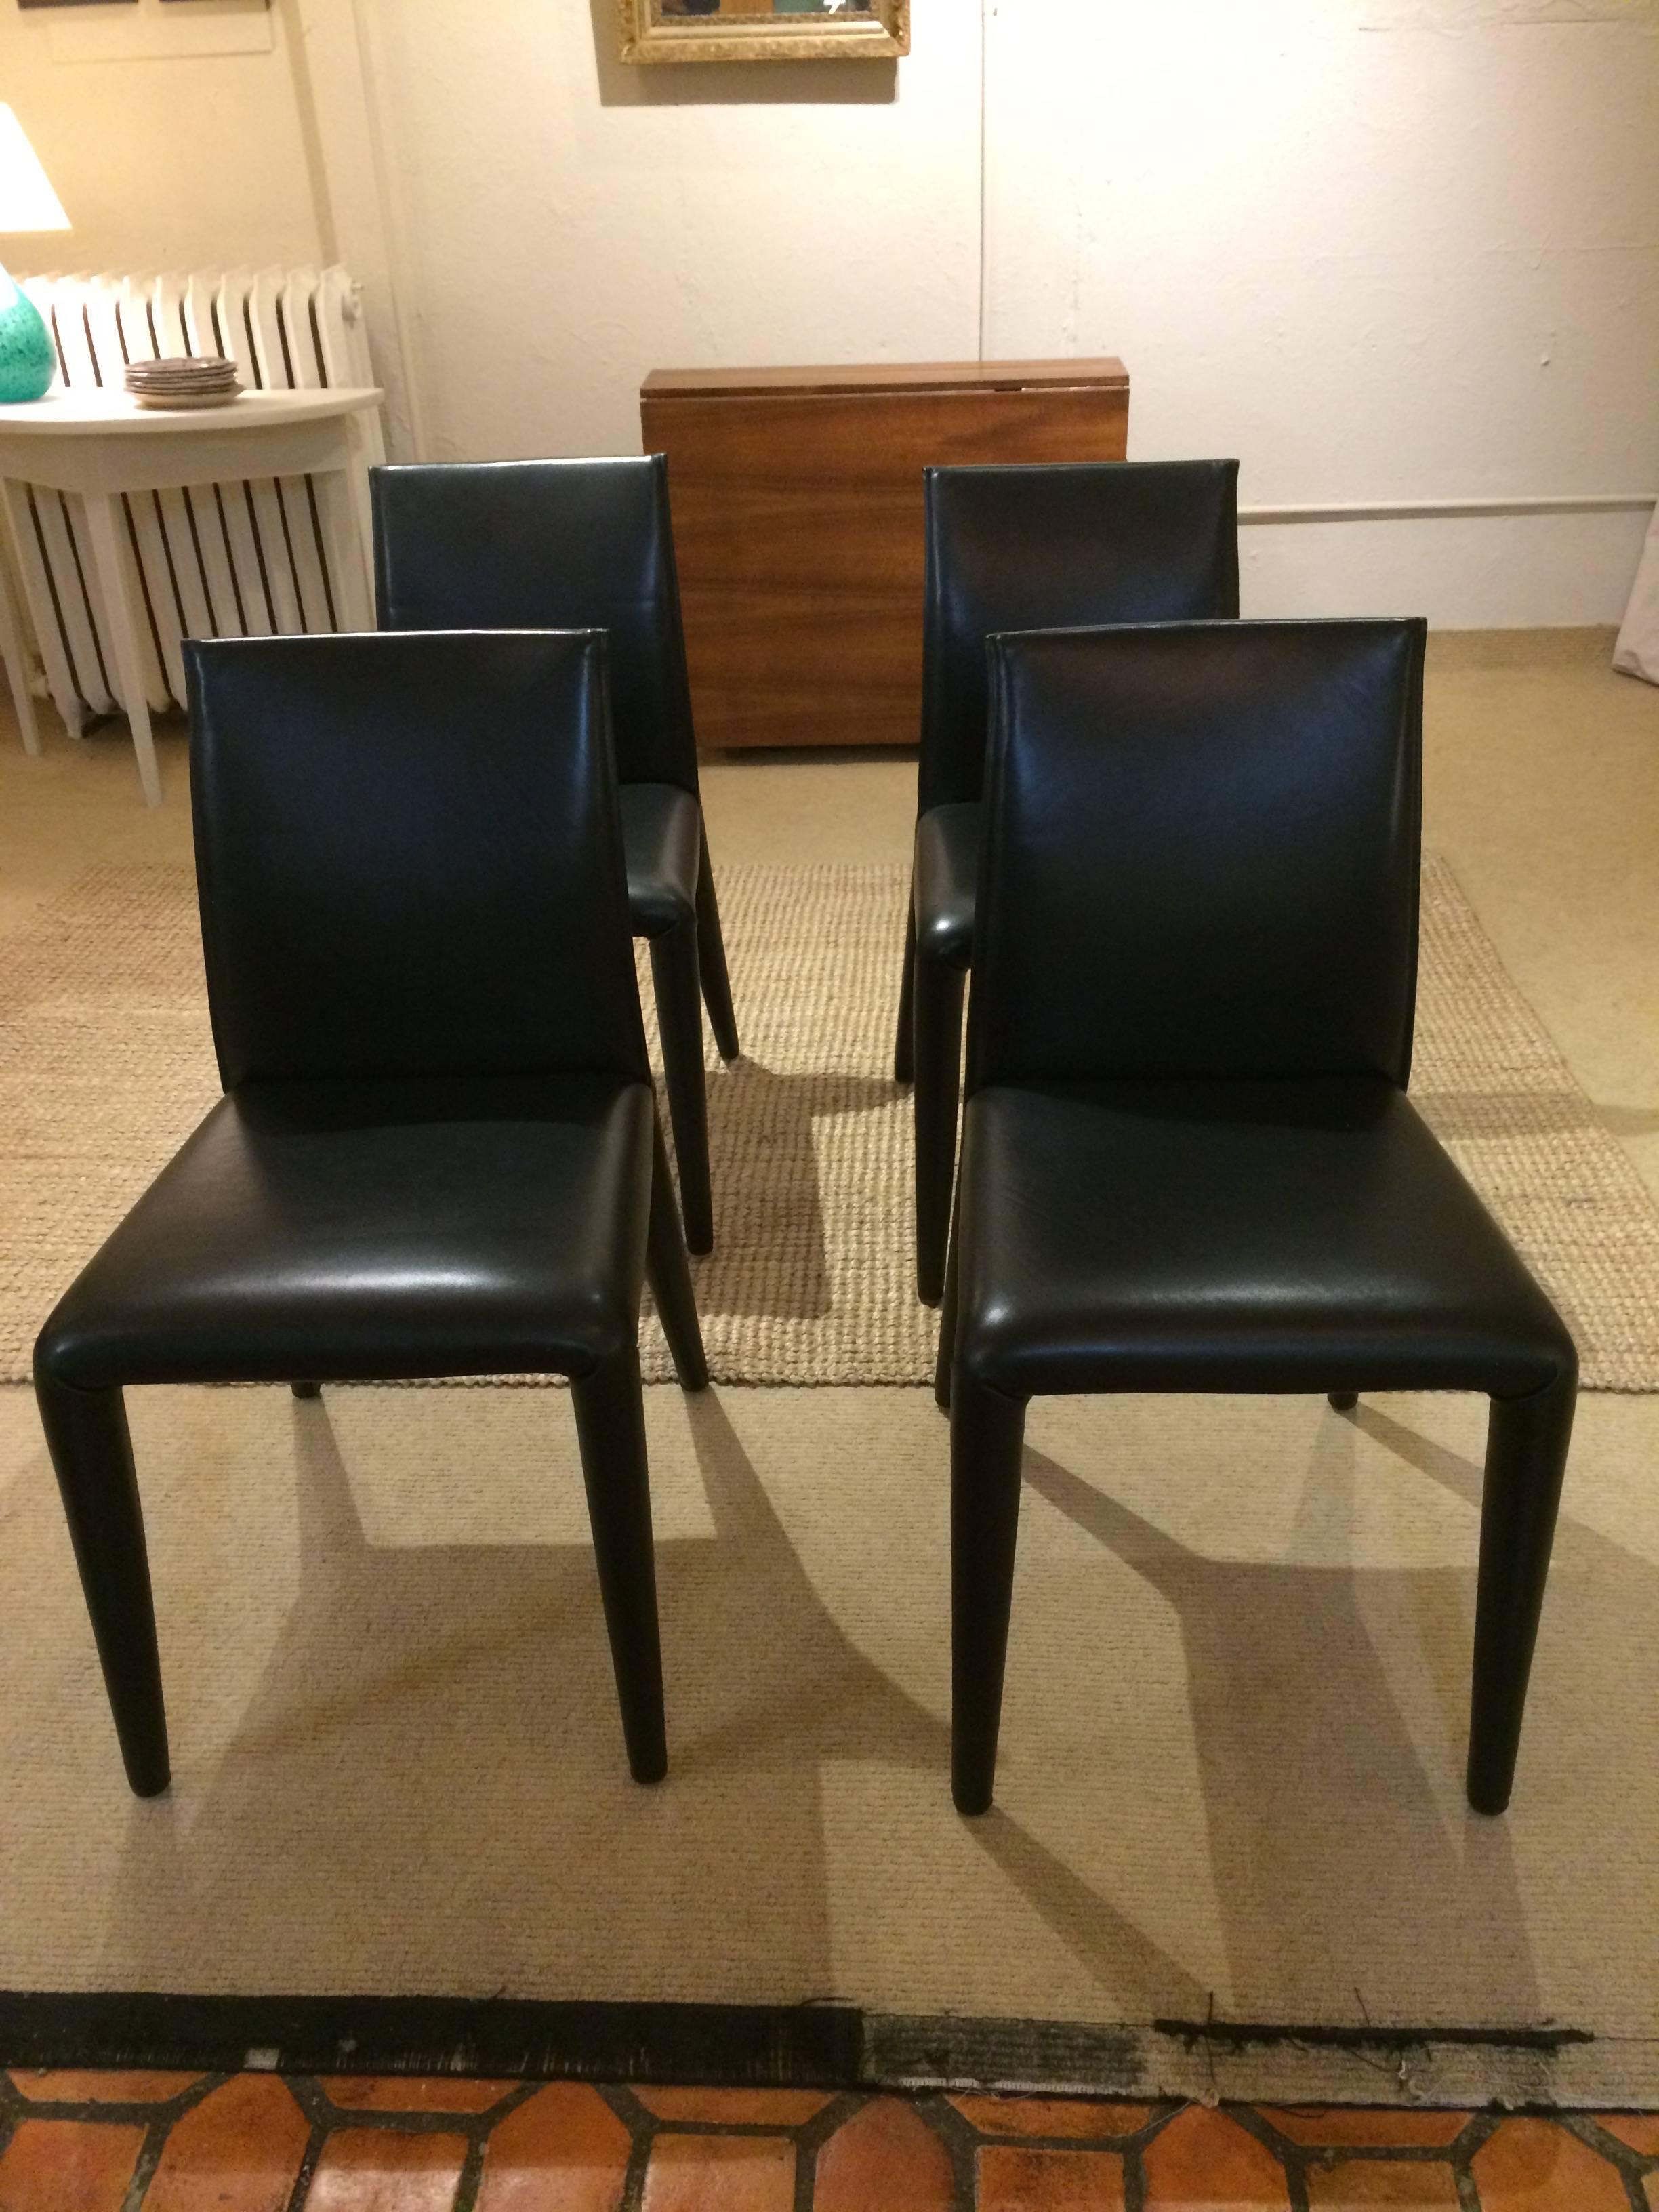 Beautifully made seamless supple black leather side chairs by B & B Italia. Mint condition. Designed by Mario Bellini.